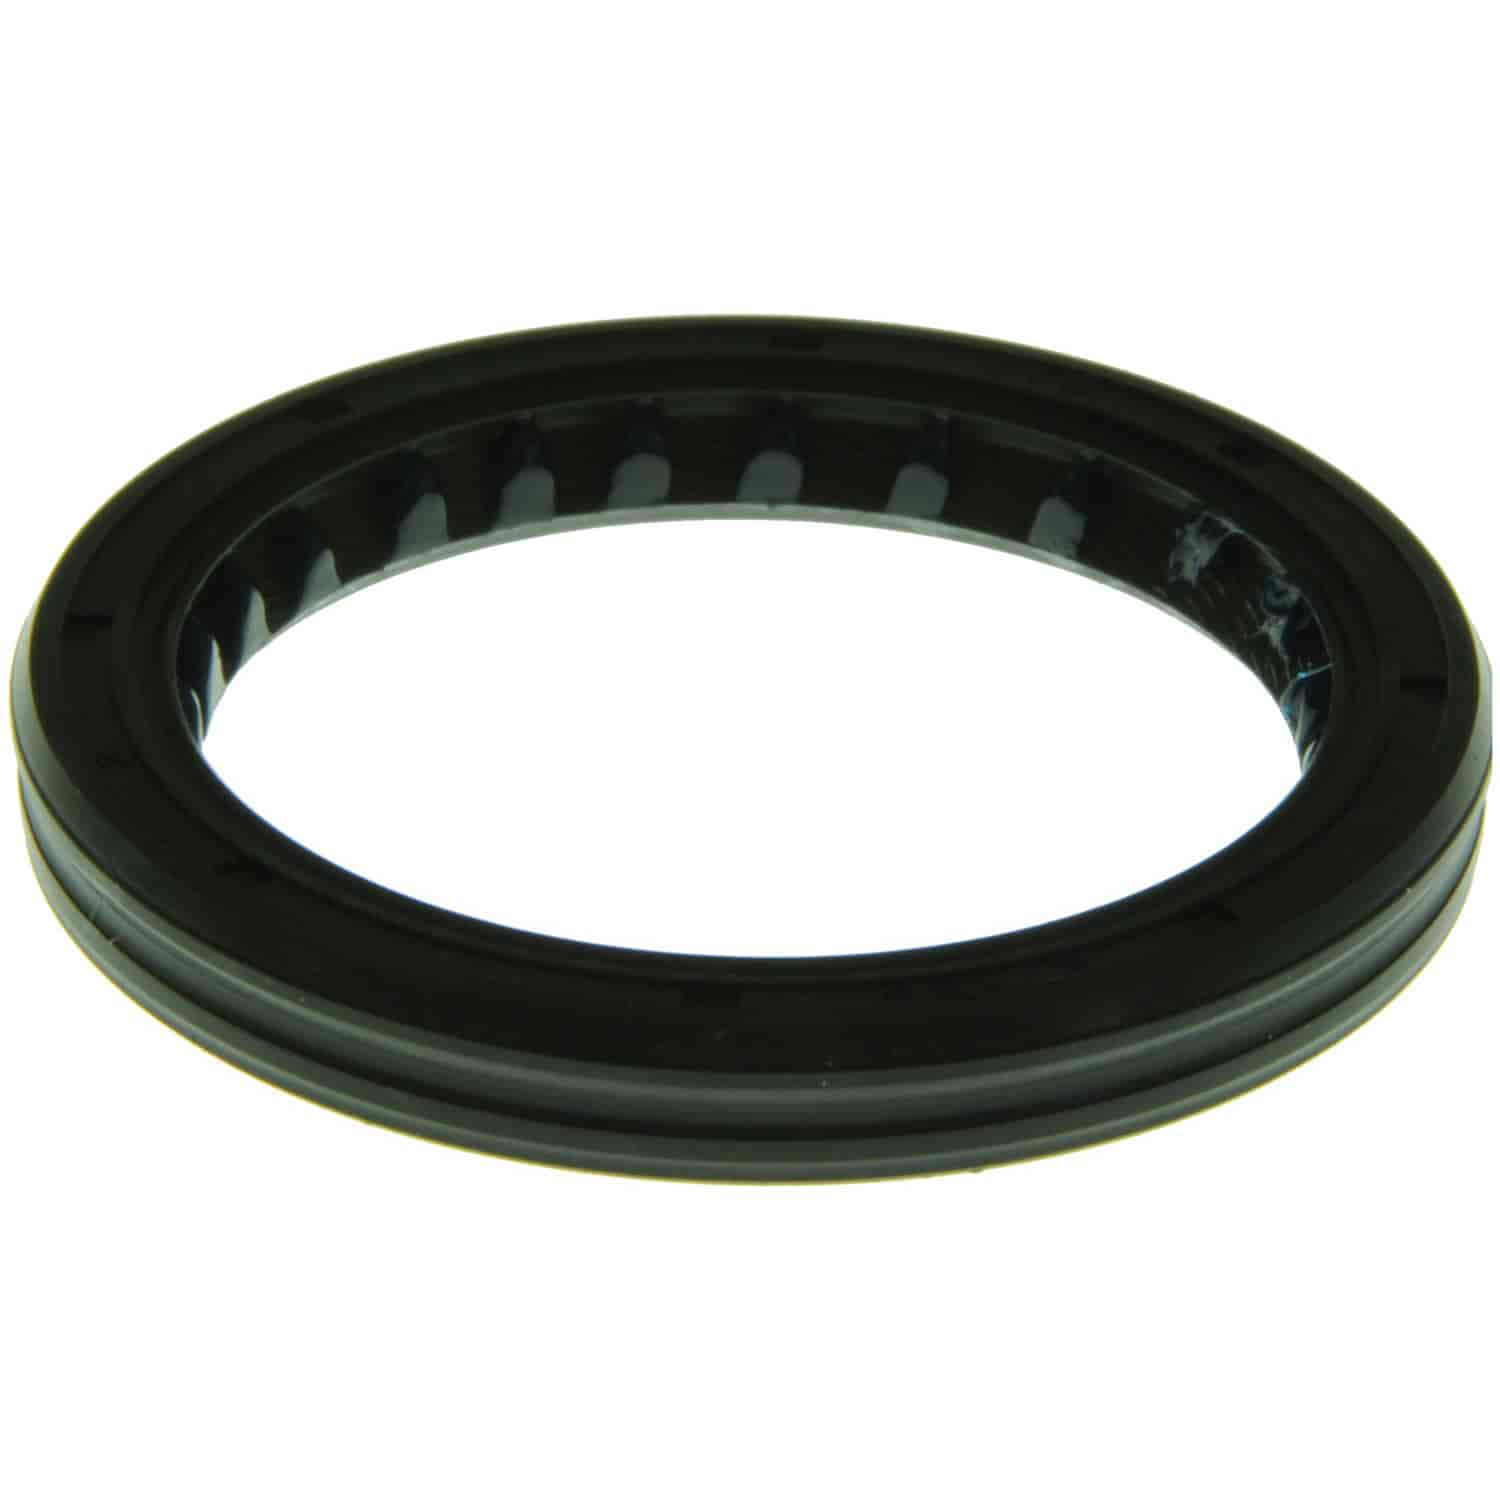 Timing Cover Seal GM-Trk 5.0L 5.7L W/Plastic Timing Cover 1996-2002 1st Design 58mm O.D.